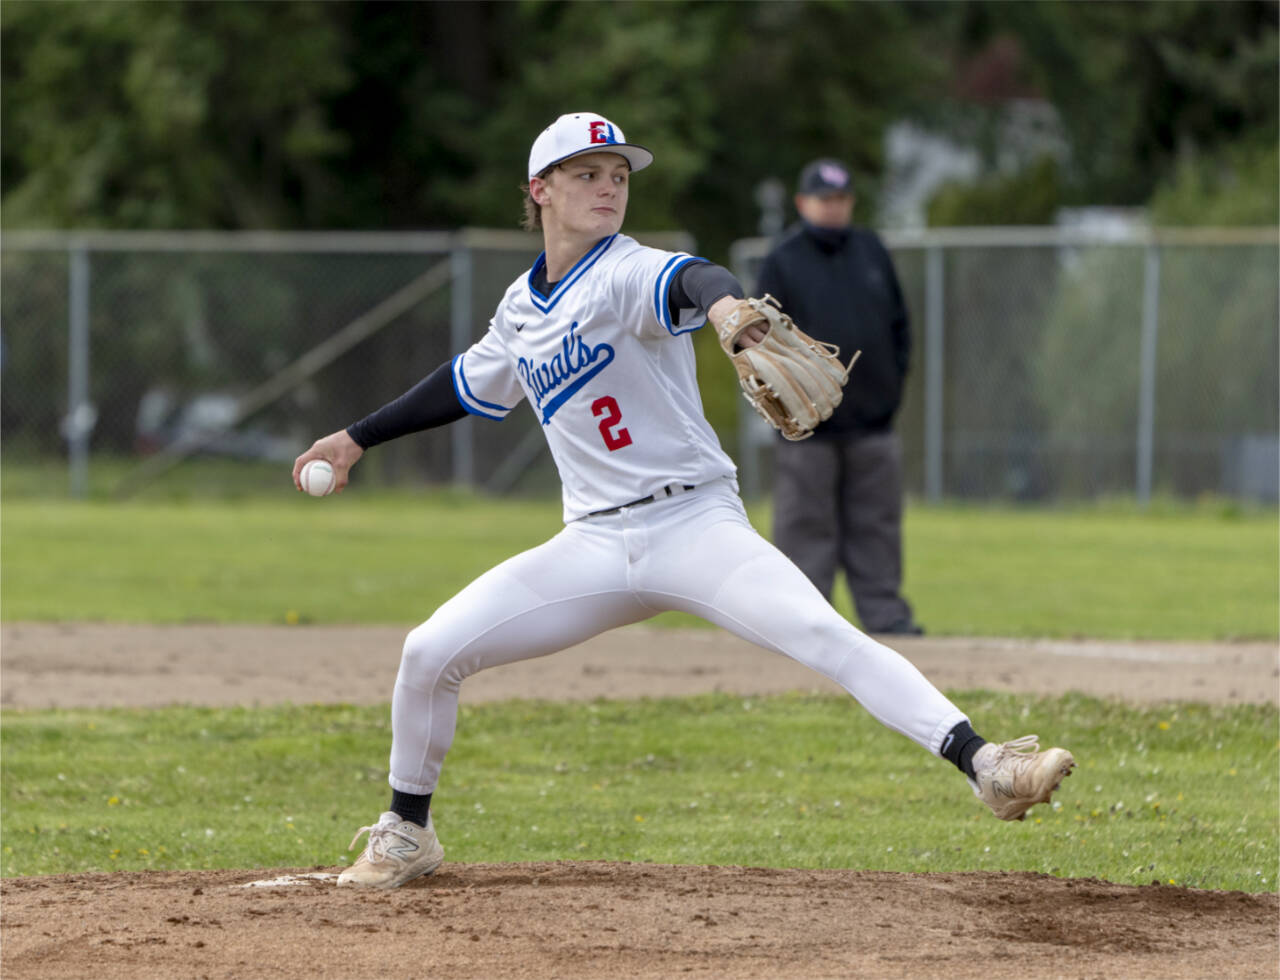 East Jefferson's Brody Moore pitches against Klahowya back in April. Moore had a shutout and at least three games that he struck out more than 10 batters this season for the Rivals. he was named tot he second team all-Nisqually League. (Steve Mullensky/for Peninsula Daily News)